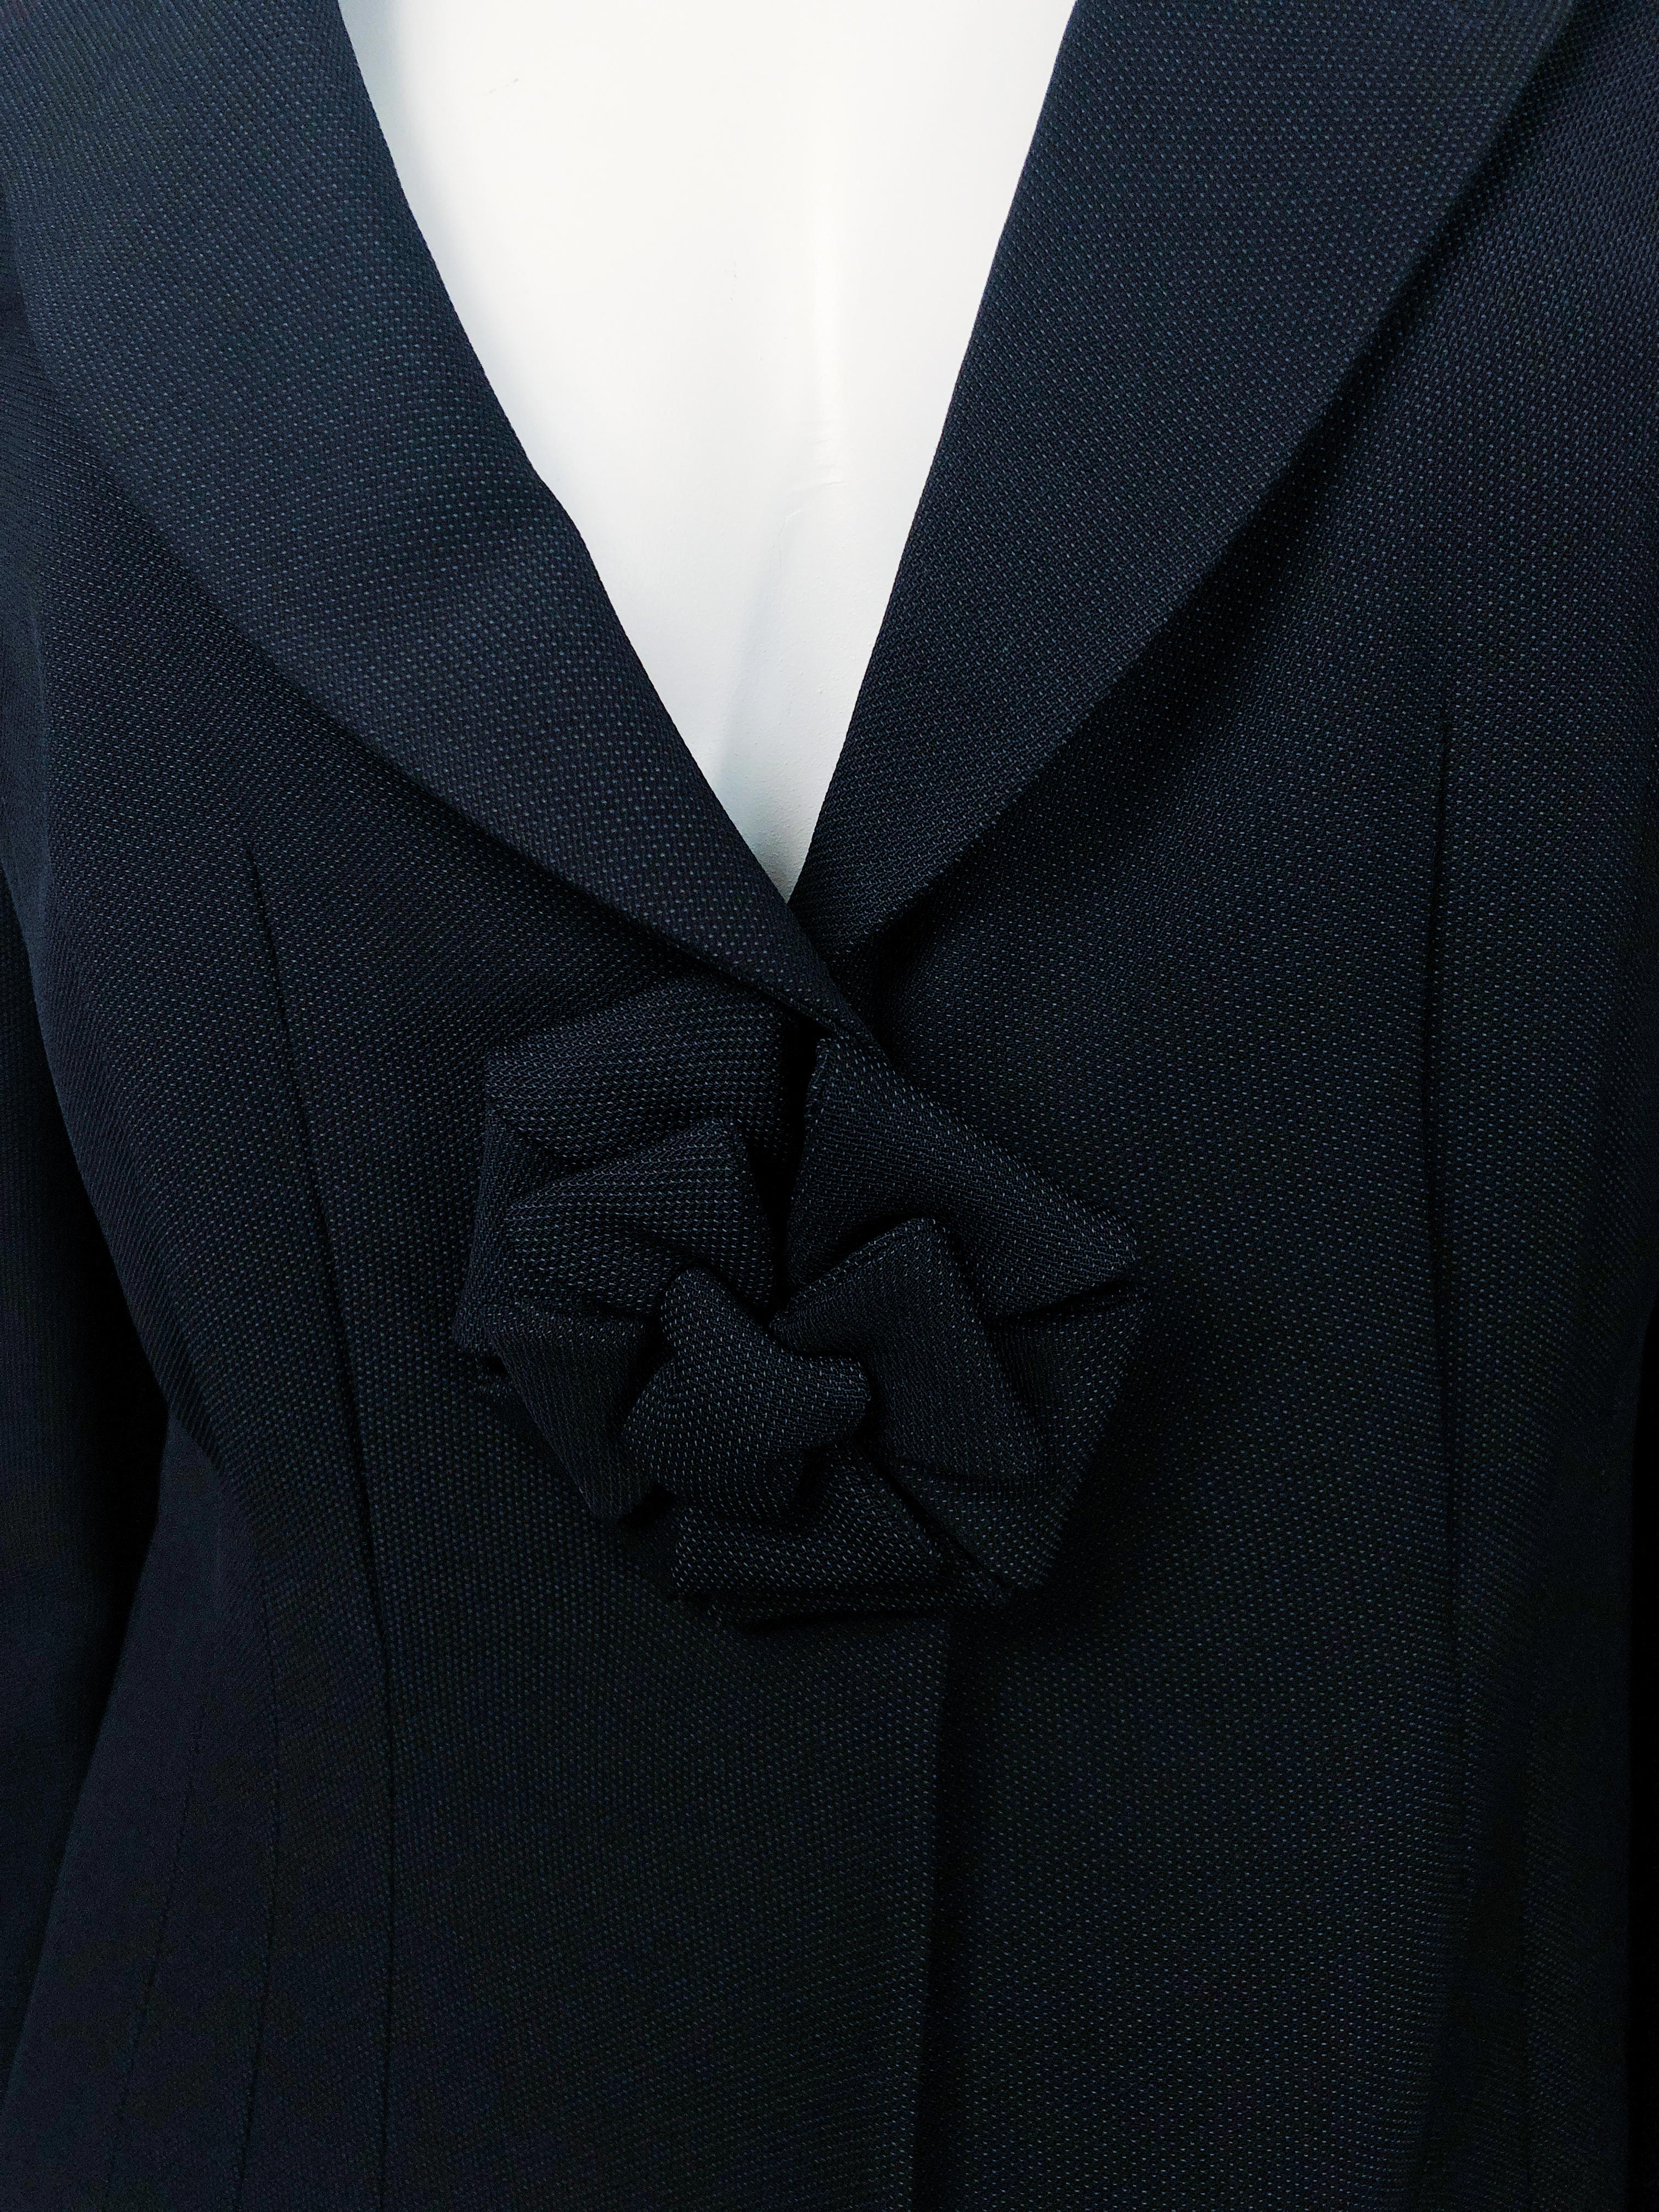 1990s Armani Black Wool Jacket With Cocarde Closure and knife pleated back.